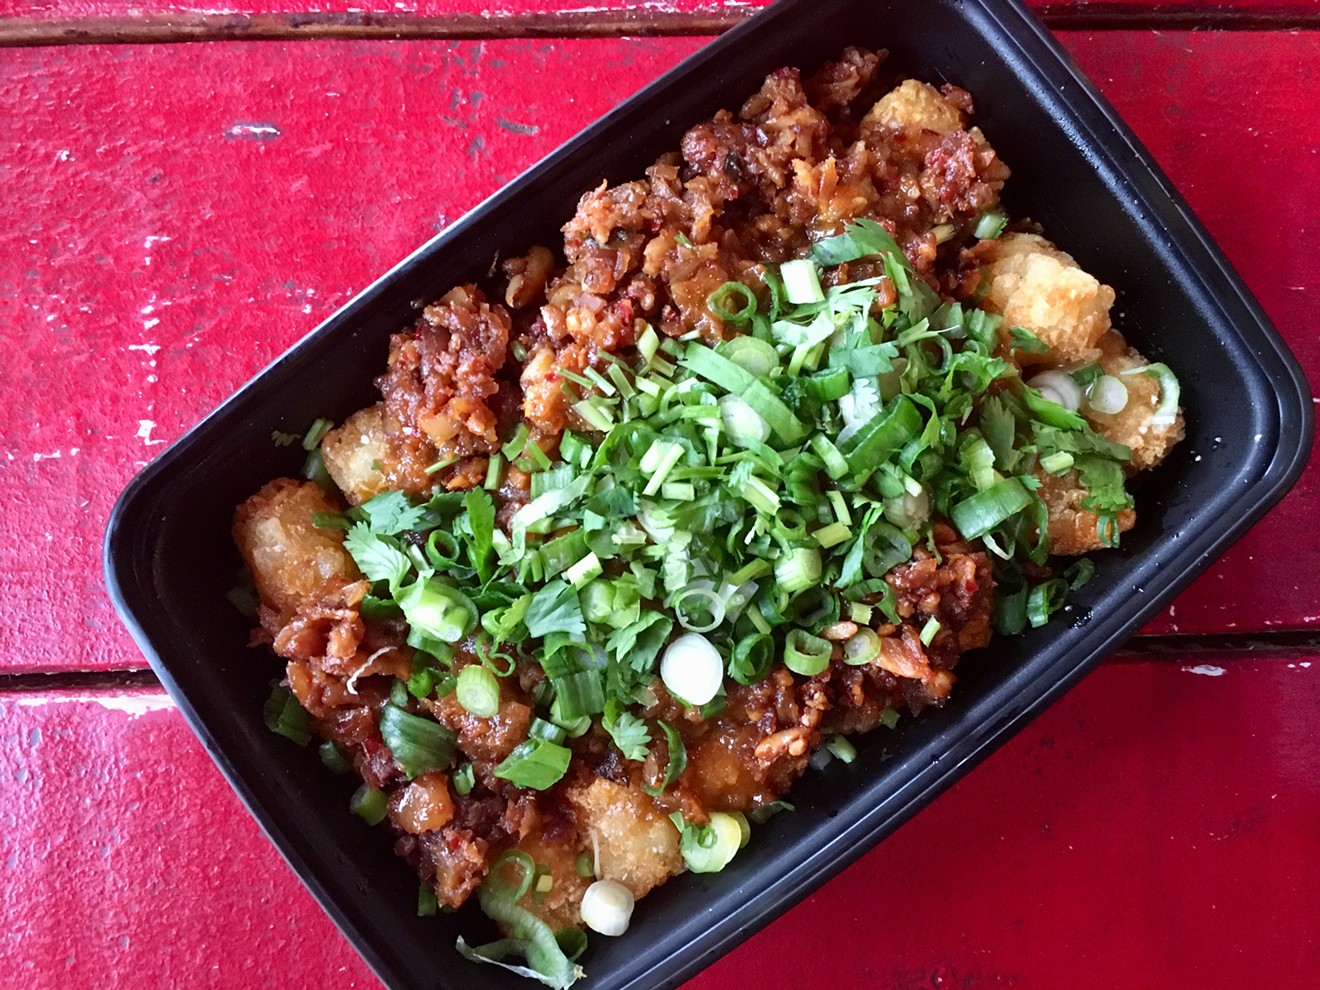 Tater tots topped with Monkey King's chopped peanuts and flash-fried garlic sauce, cilantro and green onions for $8.